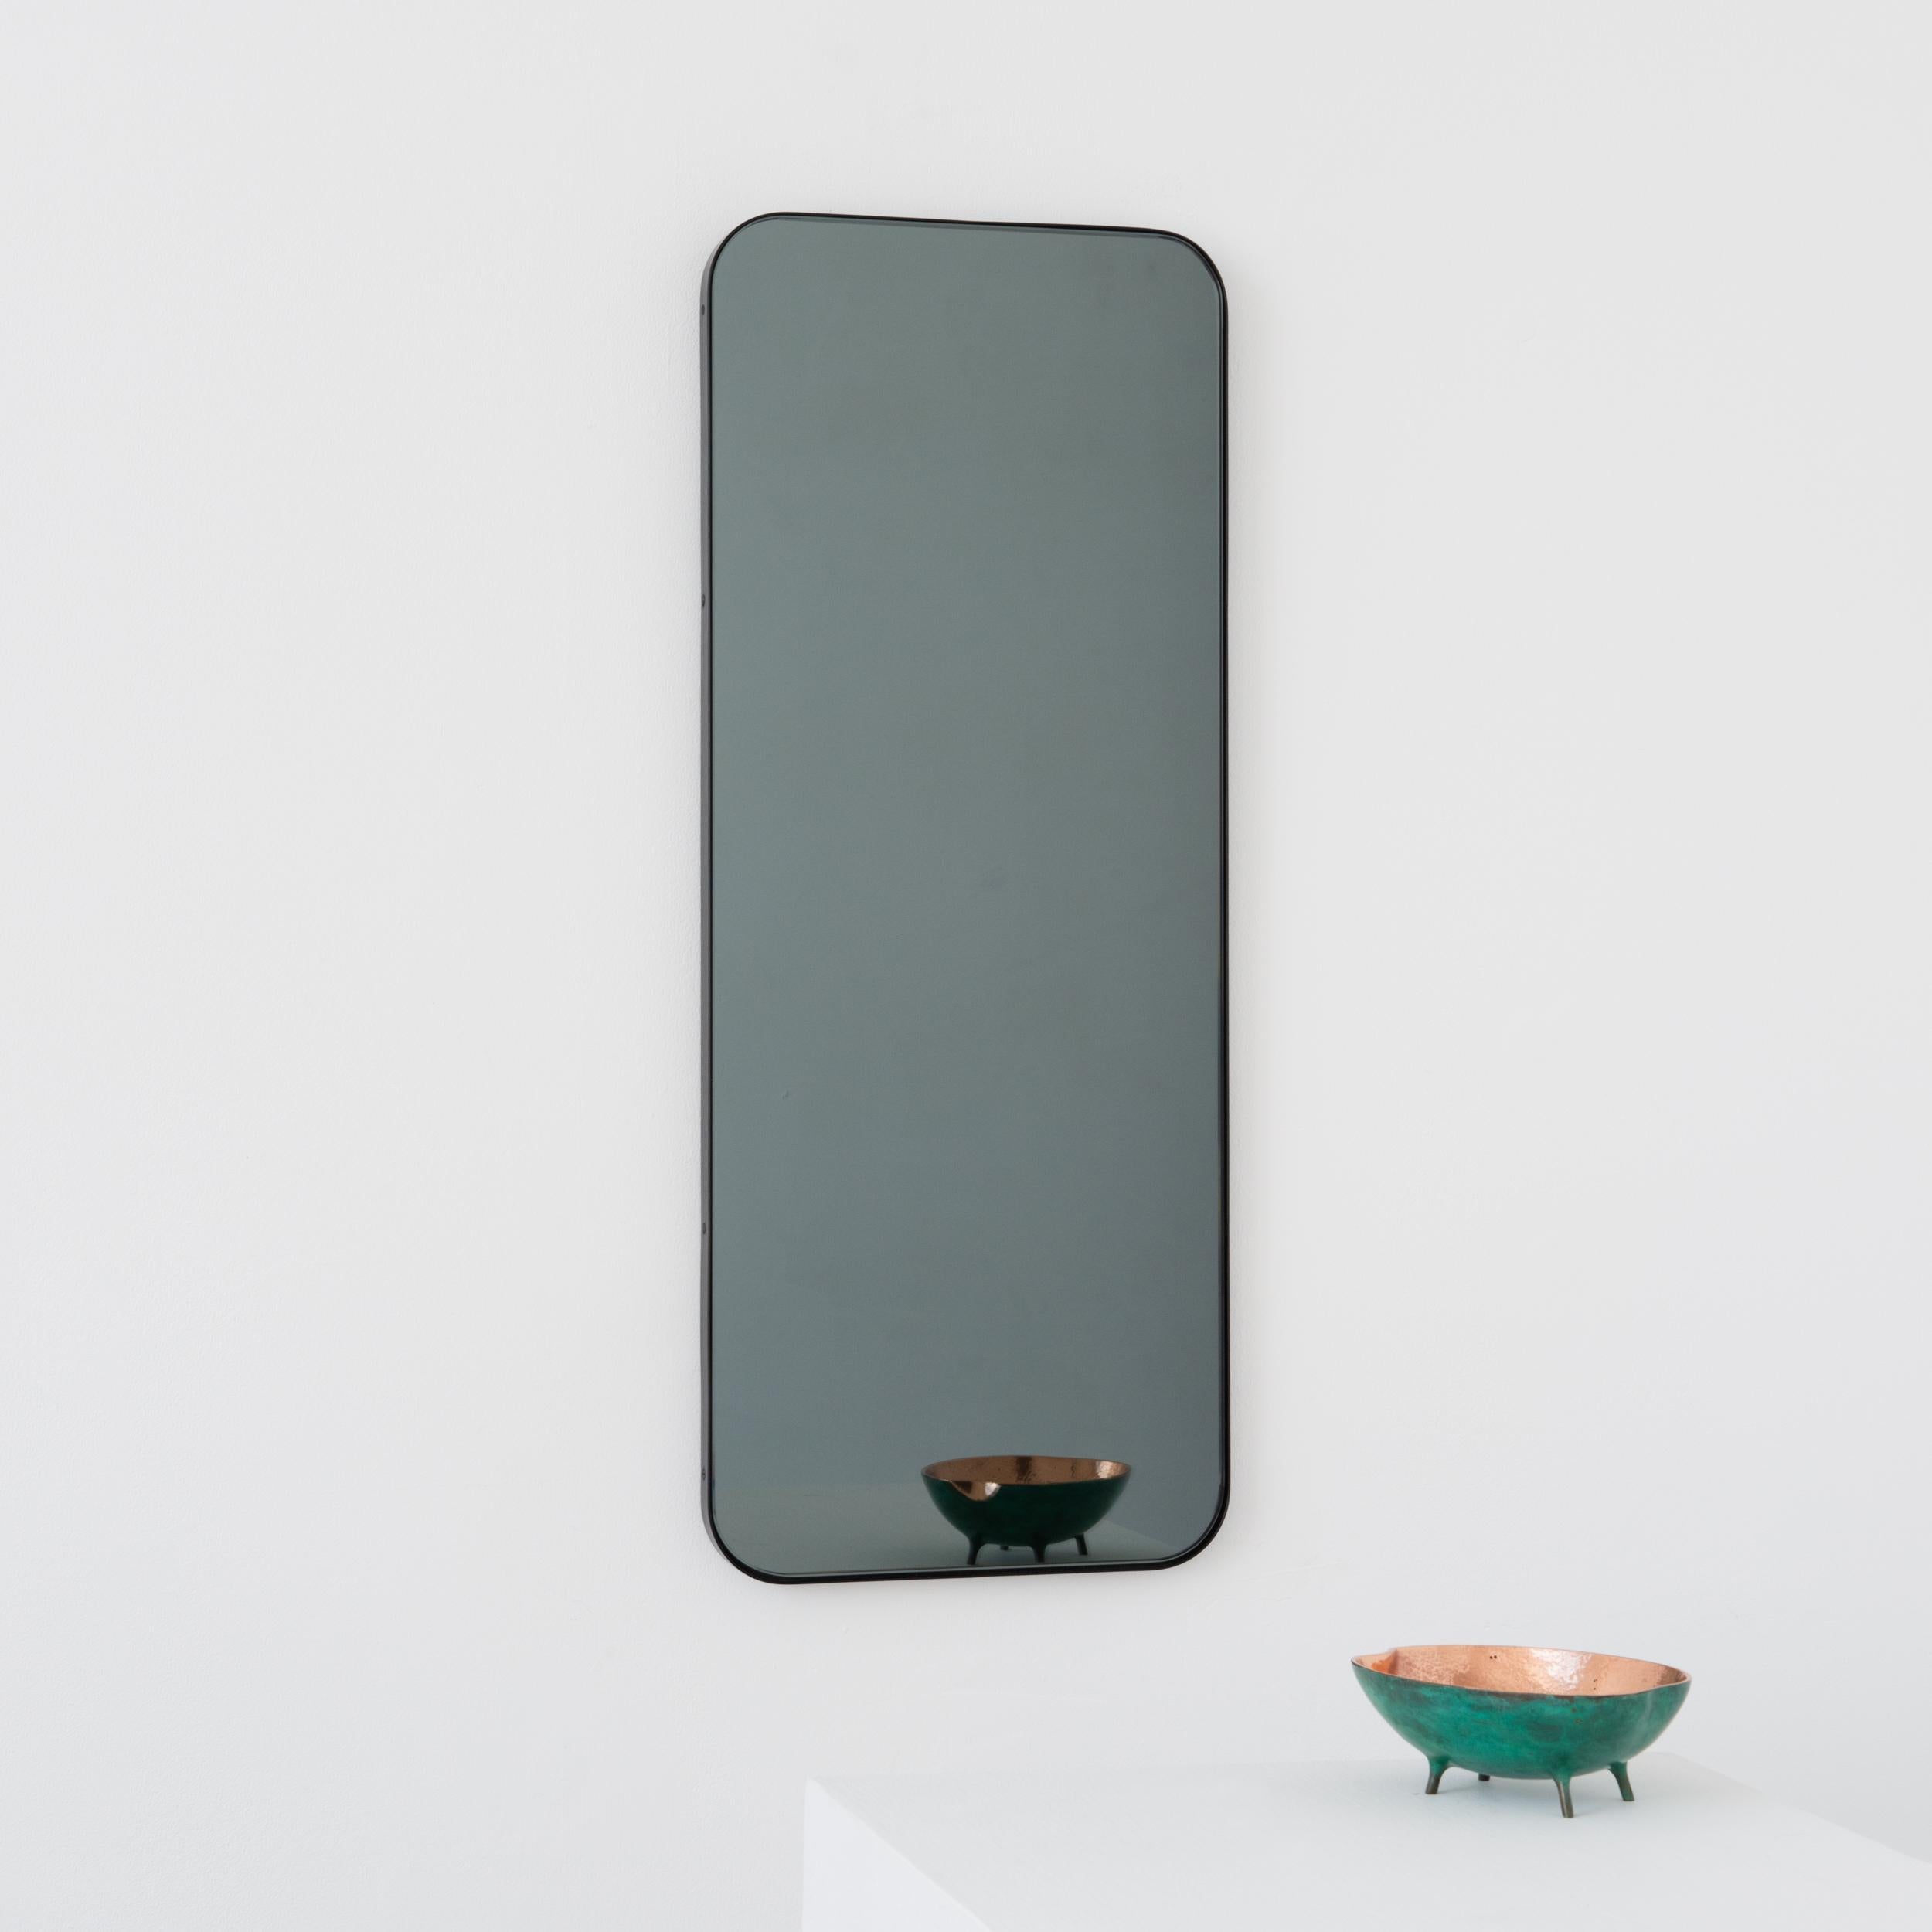 Powder-Coated Quadris Black Tinted Rectangular Modern Mirror with a Black Frame, Small For Sale